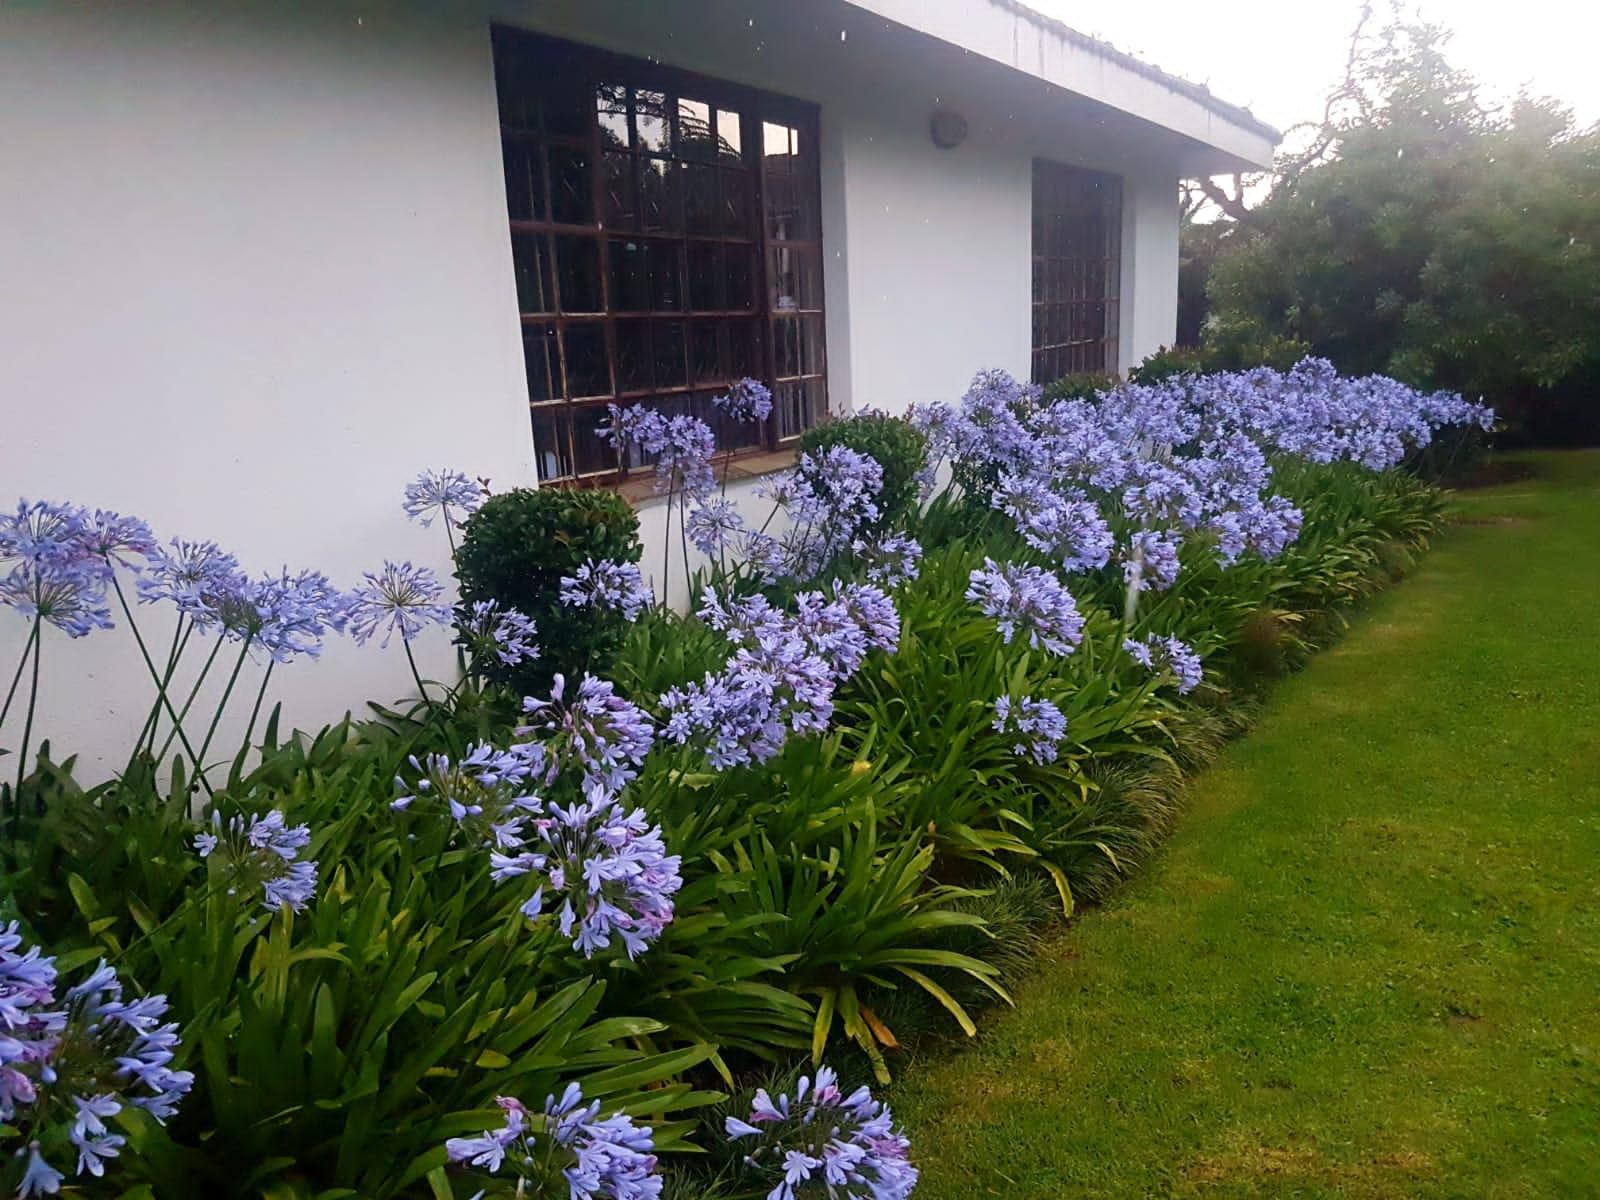 Paradise View Guesthouse Graskop Mpumalanga South Africa House, Building, Architecture, Plant, Nature, Garden